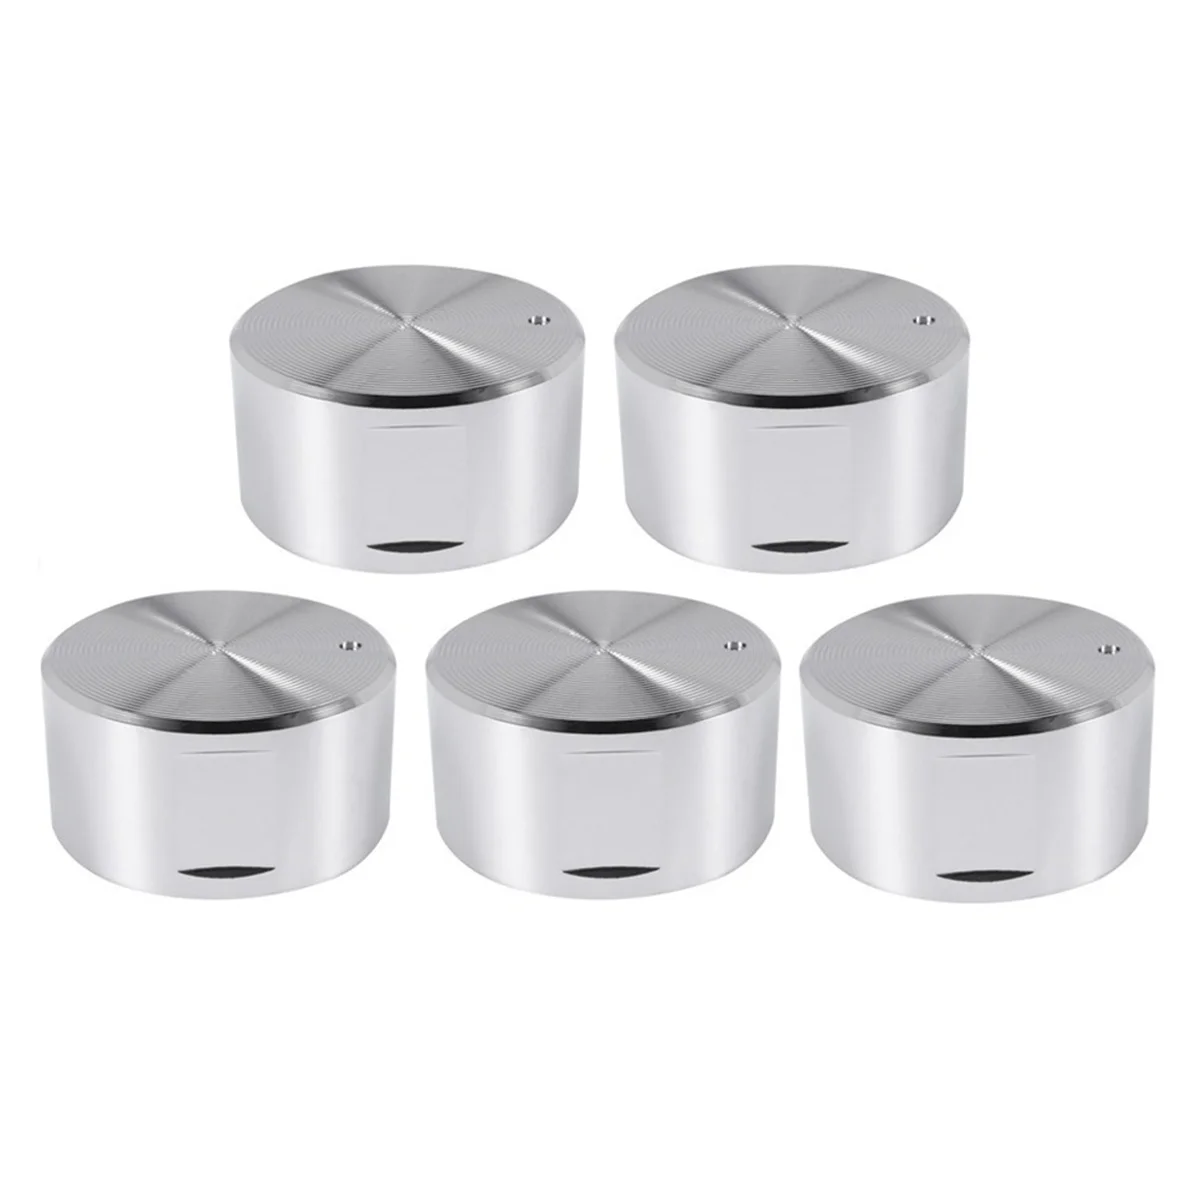 

5 Pcs Metal Gas Stove Knobs 8mm Cooker Control Range Oven Knob Burner Knob Gas Hob Switch Replacement Accessories